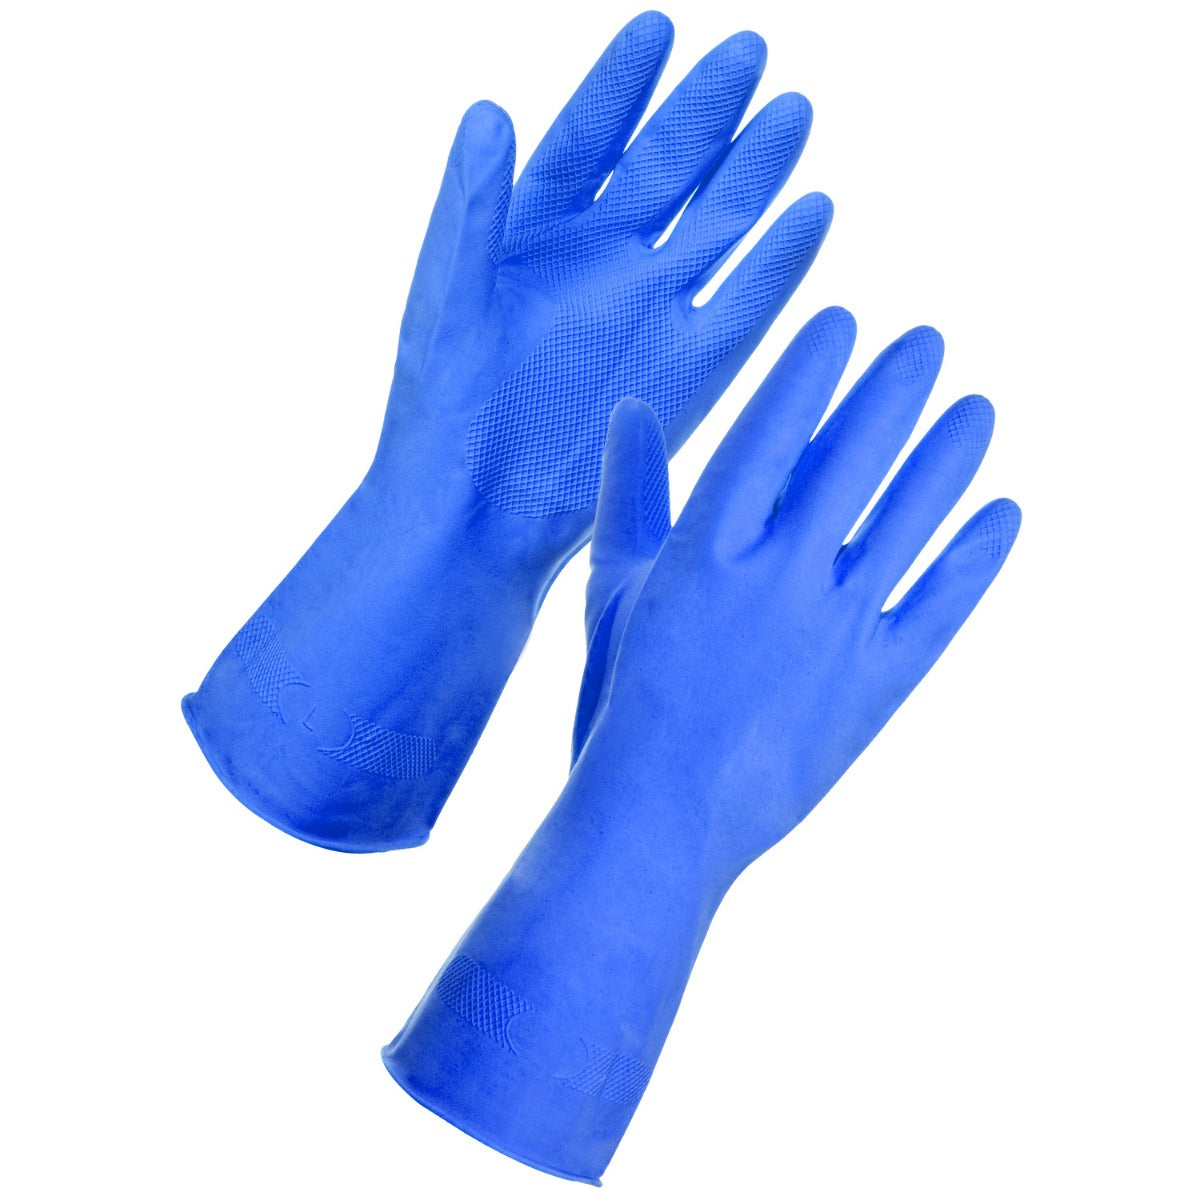 Purely Class Household Rubber Gloves Blue Small x 1 Pair